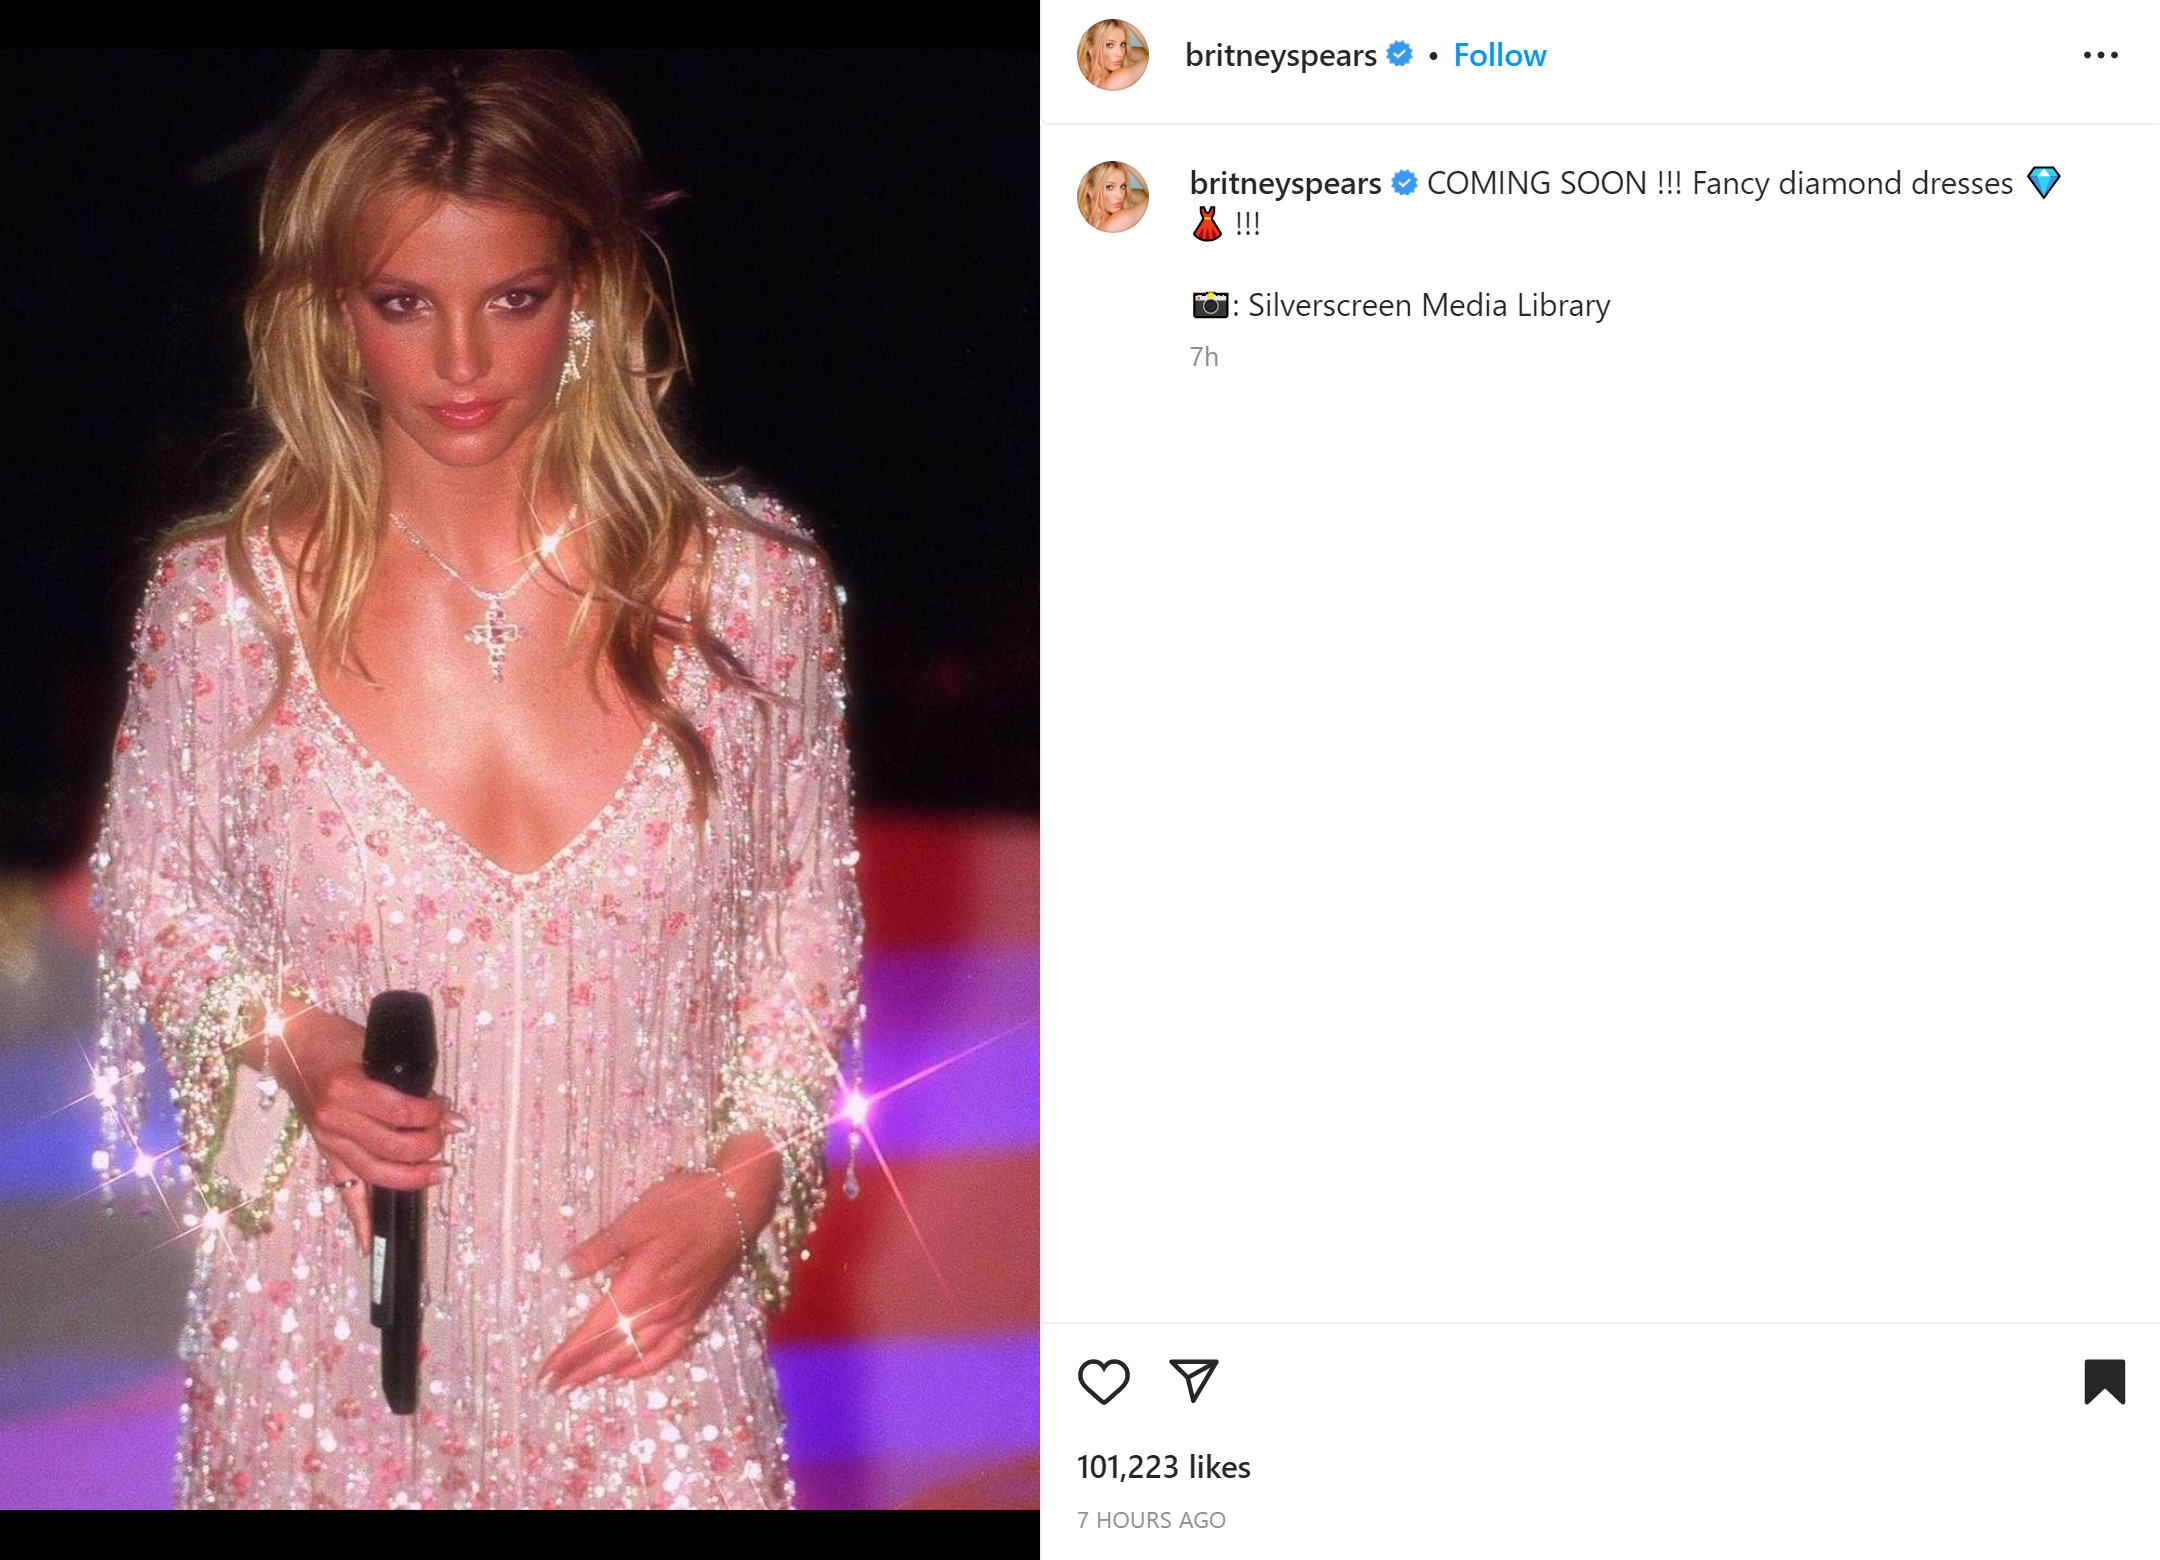 Britney Spears teases diamond dresses are "coming soon"